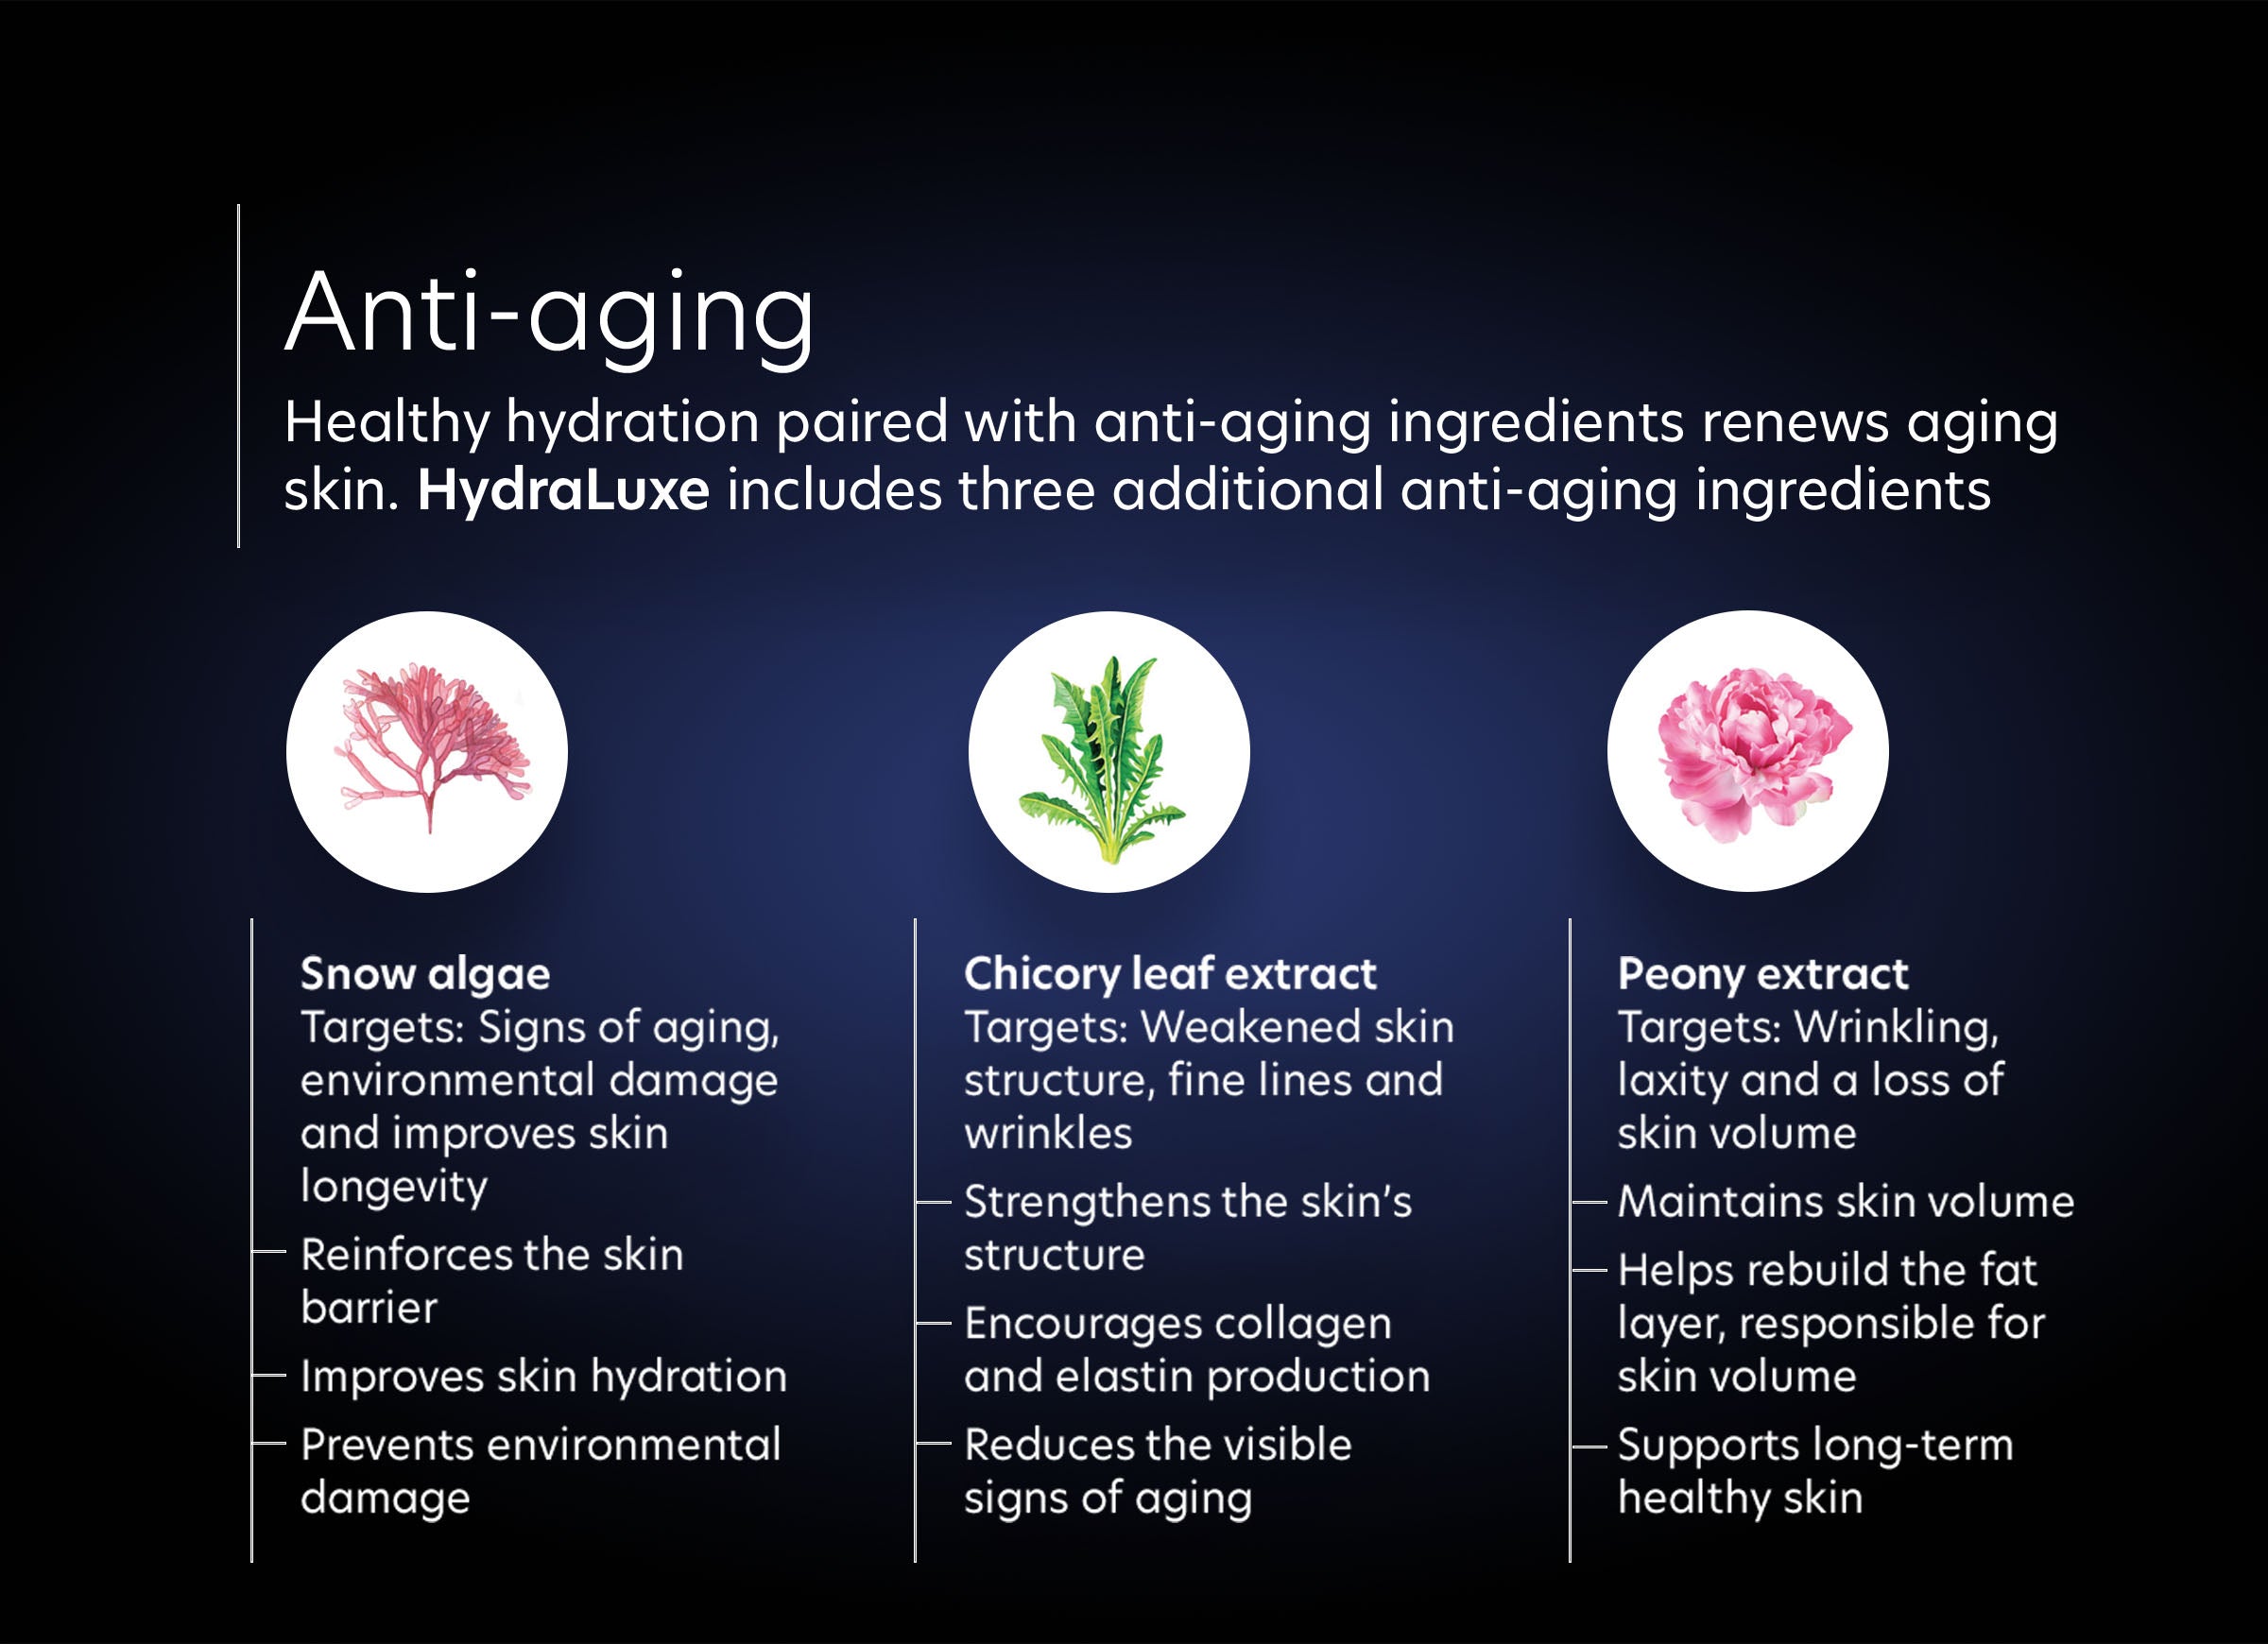 HydraLuxe - Anti-aging Healthy hydration paired with anti-aging ingredients renews aging skin.